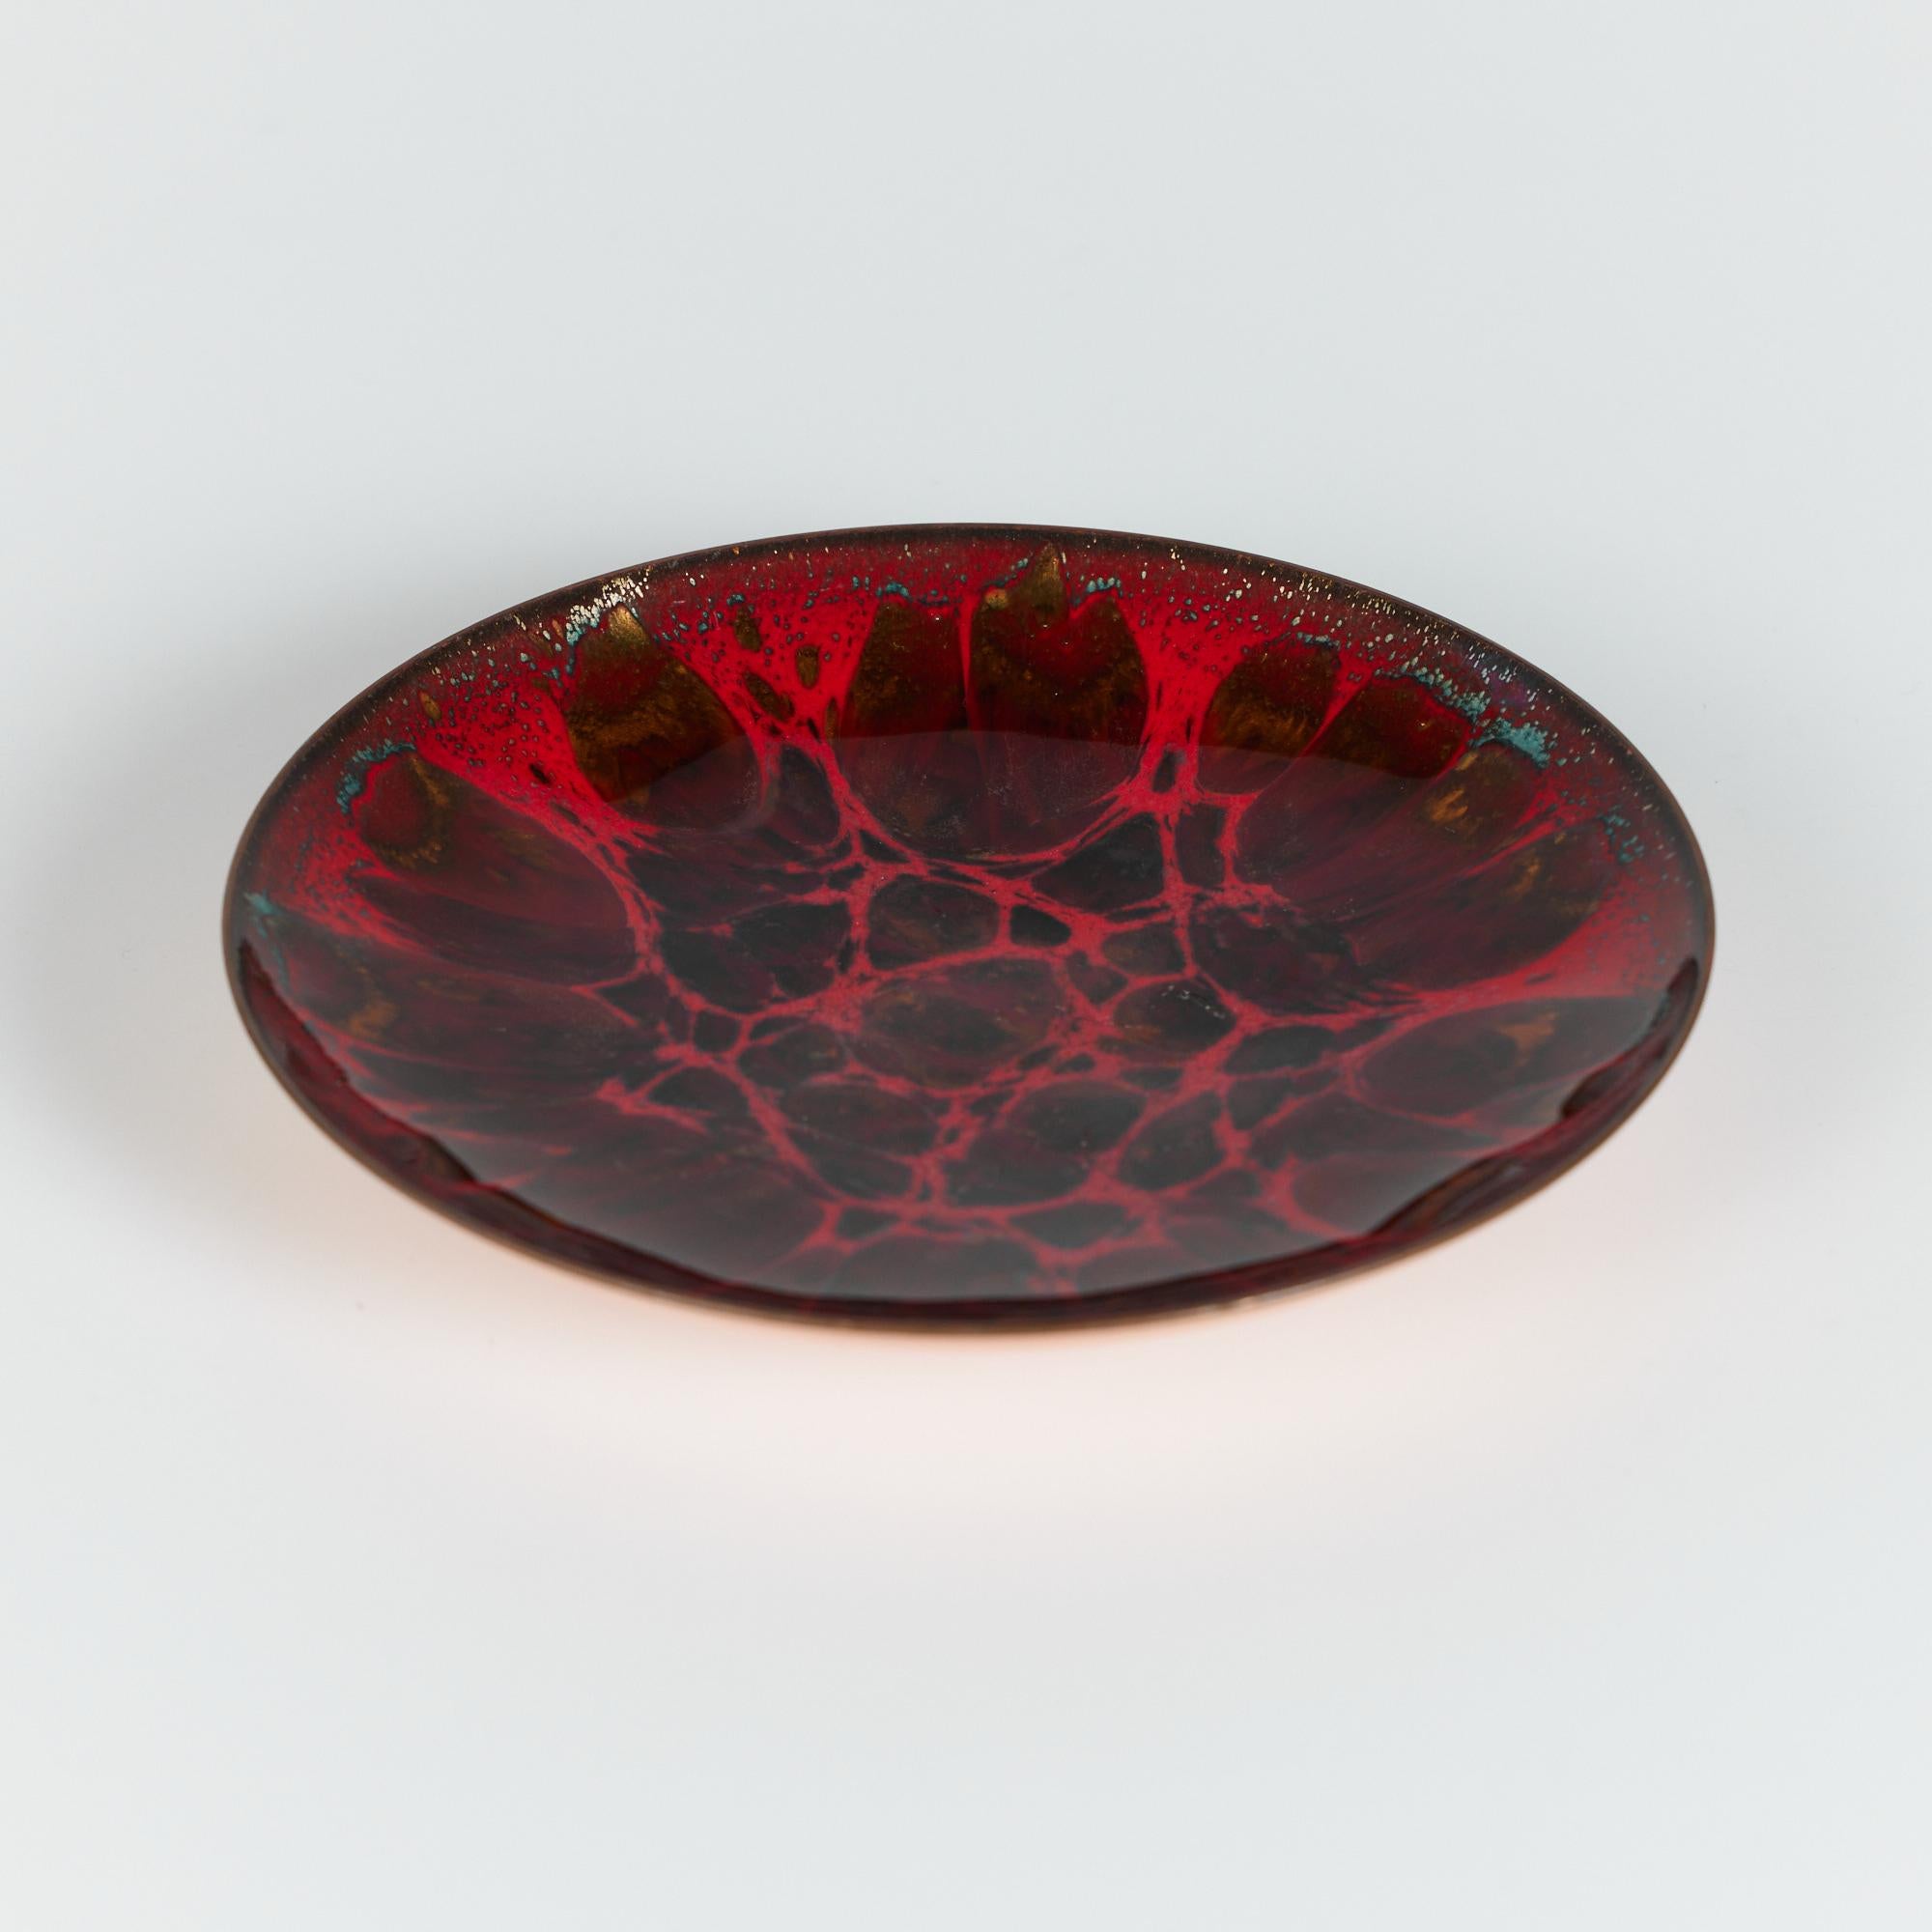 Copper plate by San Francisco artist Win Ng, circa1960s USA. A beautiful red enameled catchall or simply a décor piece. The dish features a technique that creates an asymmetrical pattern by fusing powdered glass to metal.
Signed Win Ng San